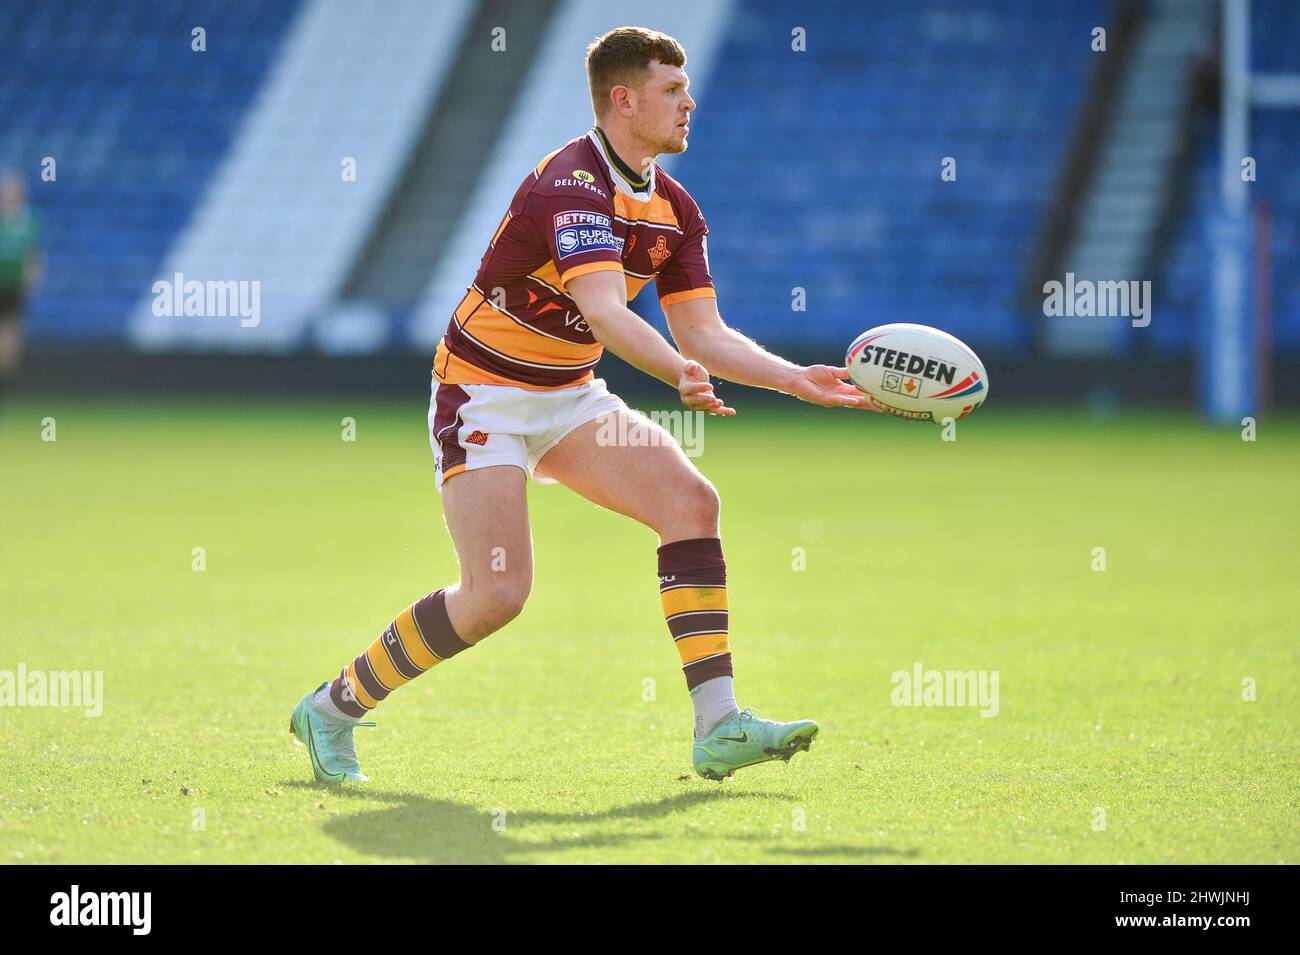 Huddersfield, Royaume-Uni. 6th mars 2022. Olly Russell (23) de Huddersfield Giants en action pendant la ligue de rugby Betfred Super League Round 4 Huddersfield Giants vs Salford Red Devils au stade John Smith, Huddersfield, Royaume-Uni Credit: Dean Williams/Alay Live News Banque D'Images